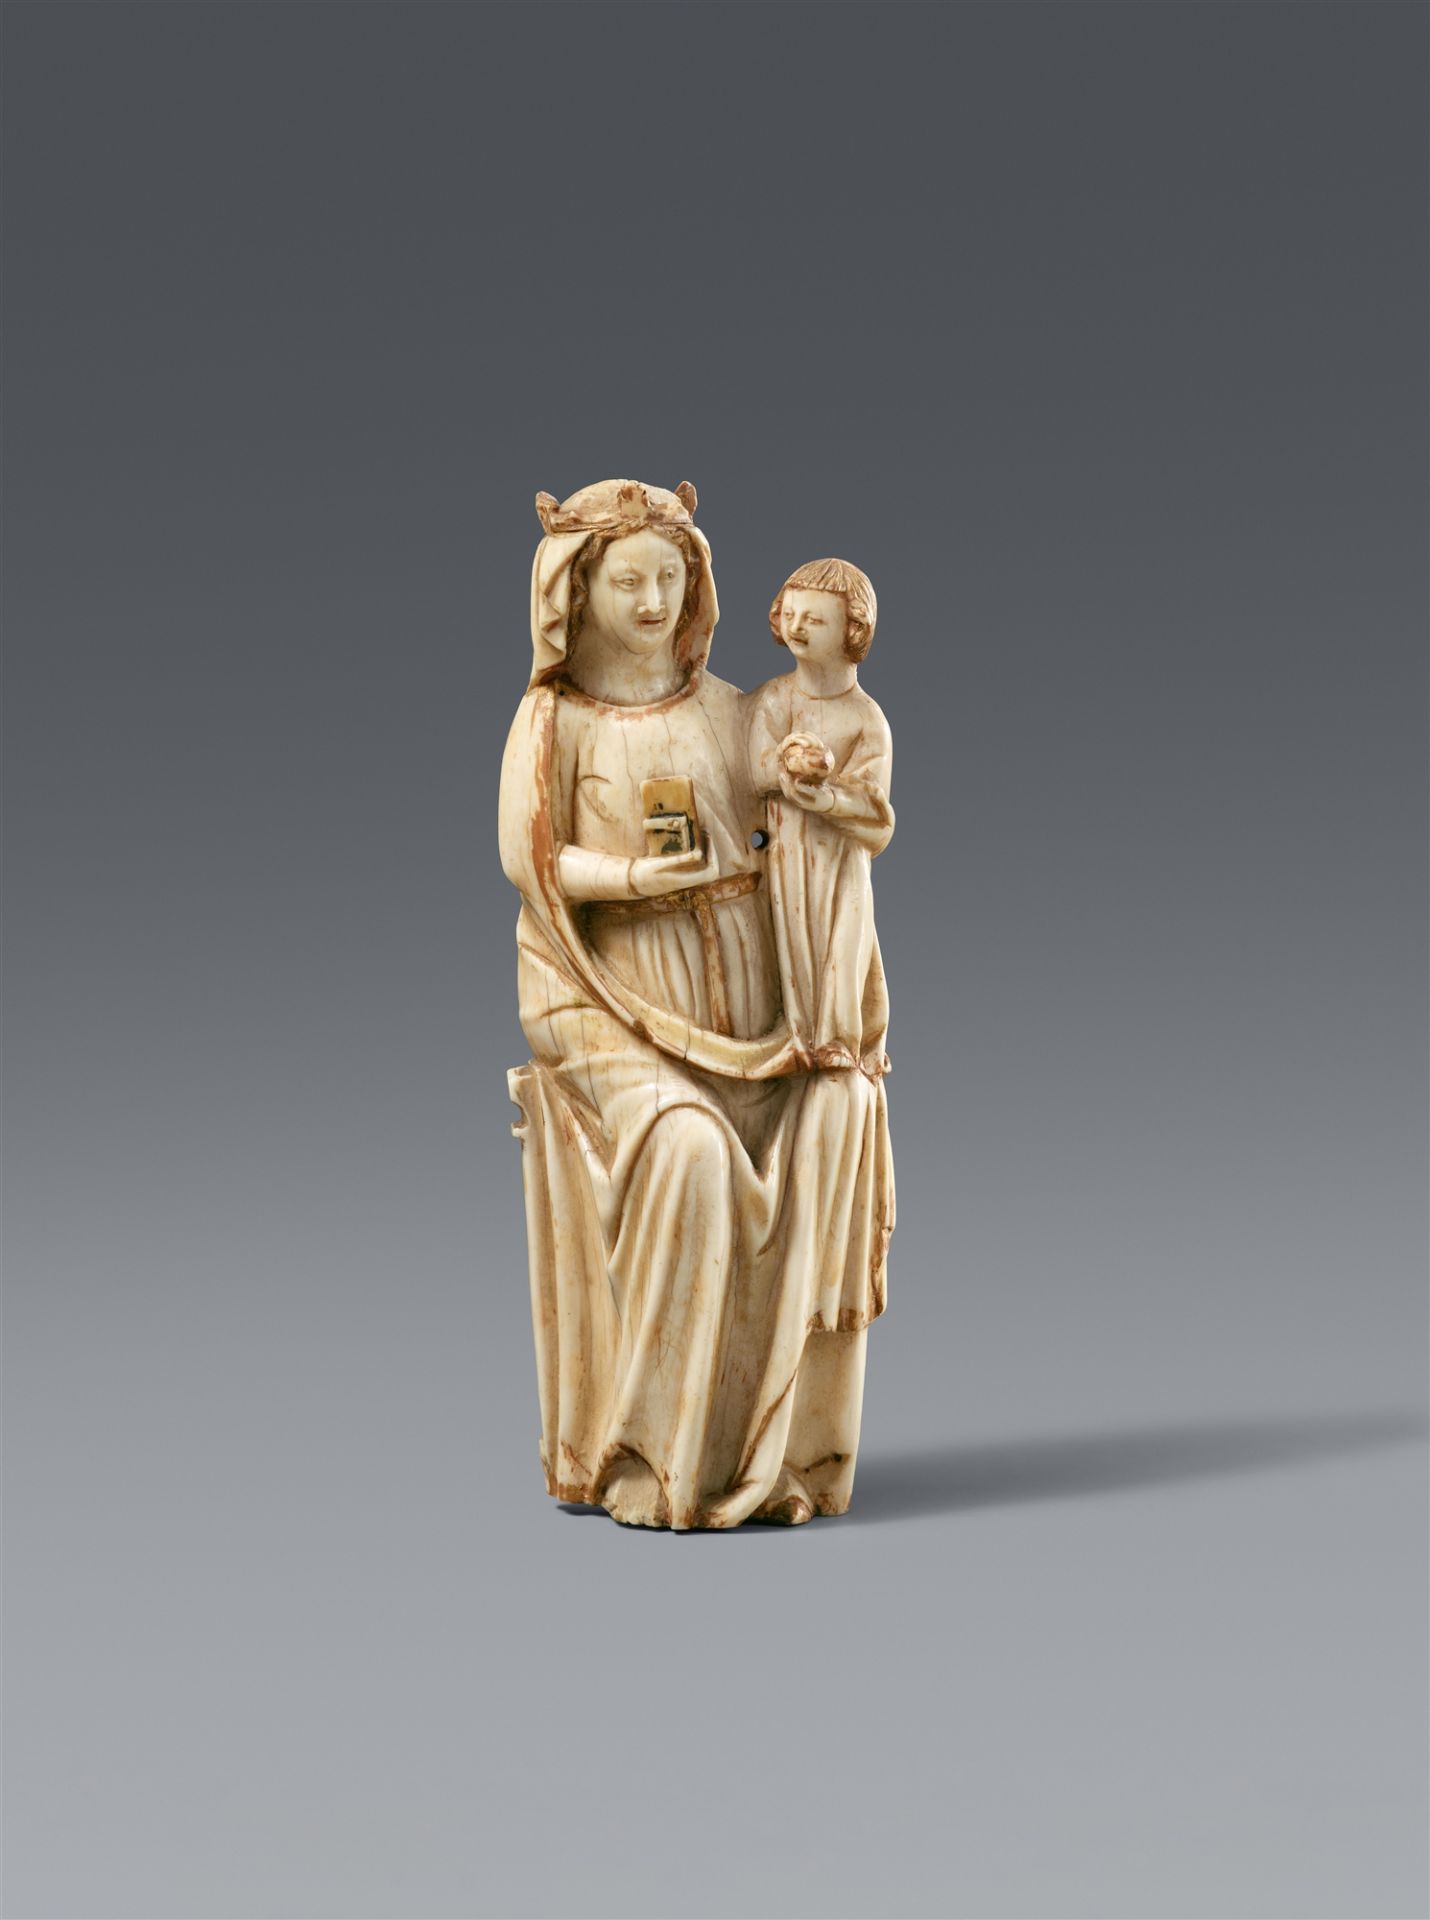 A French carved ivory figure of the Virgin enthroned, second half 14th century